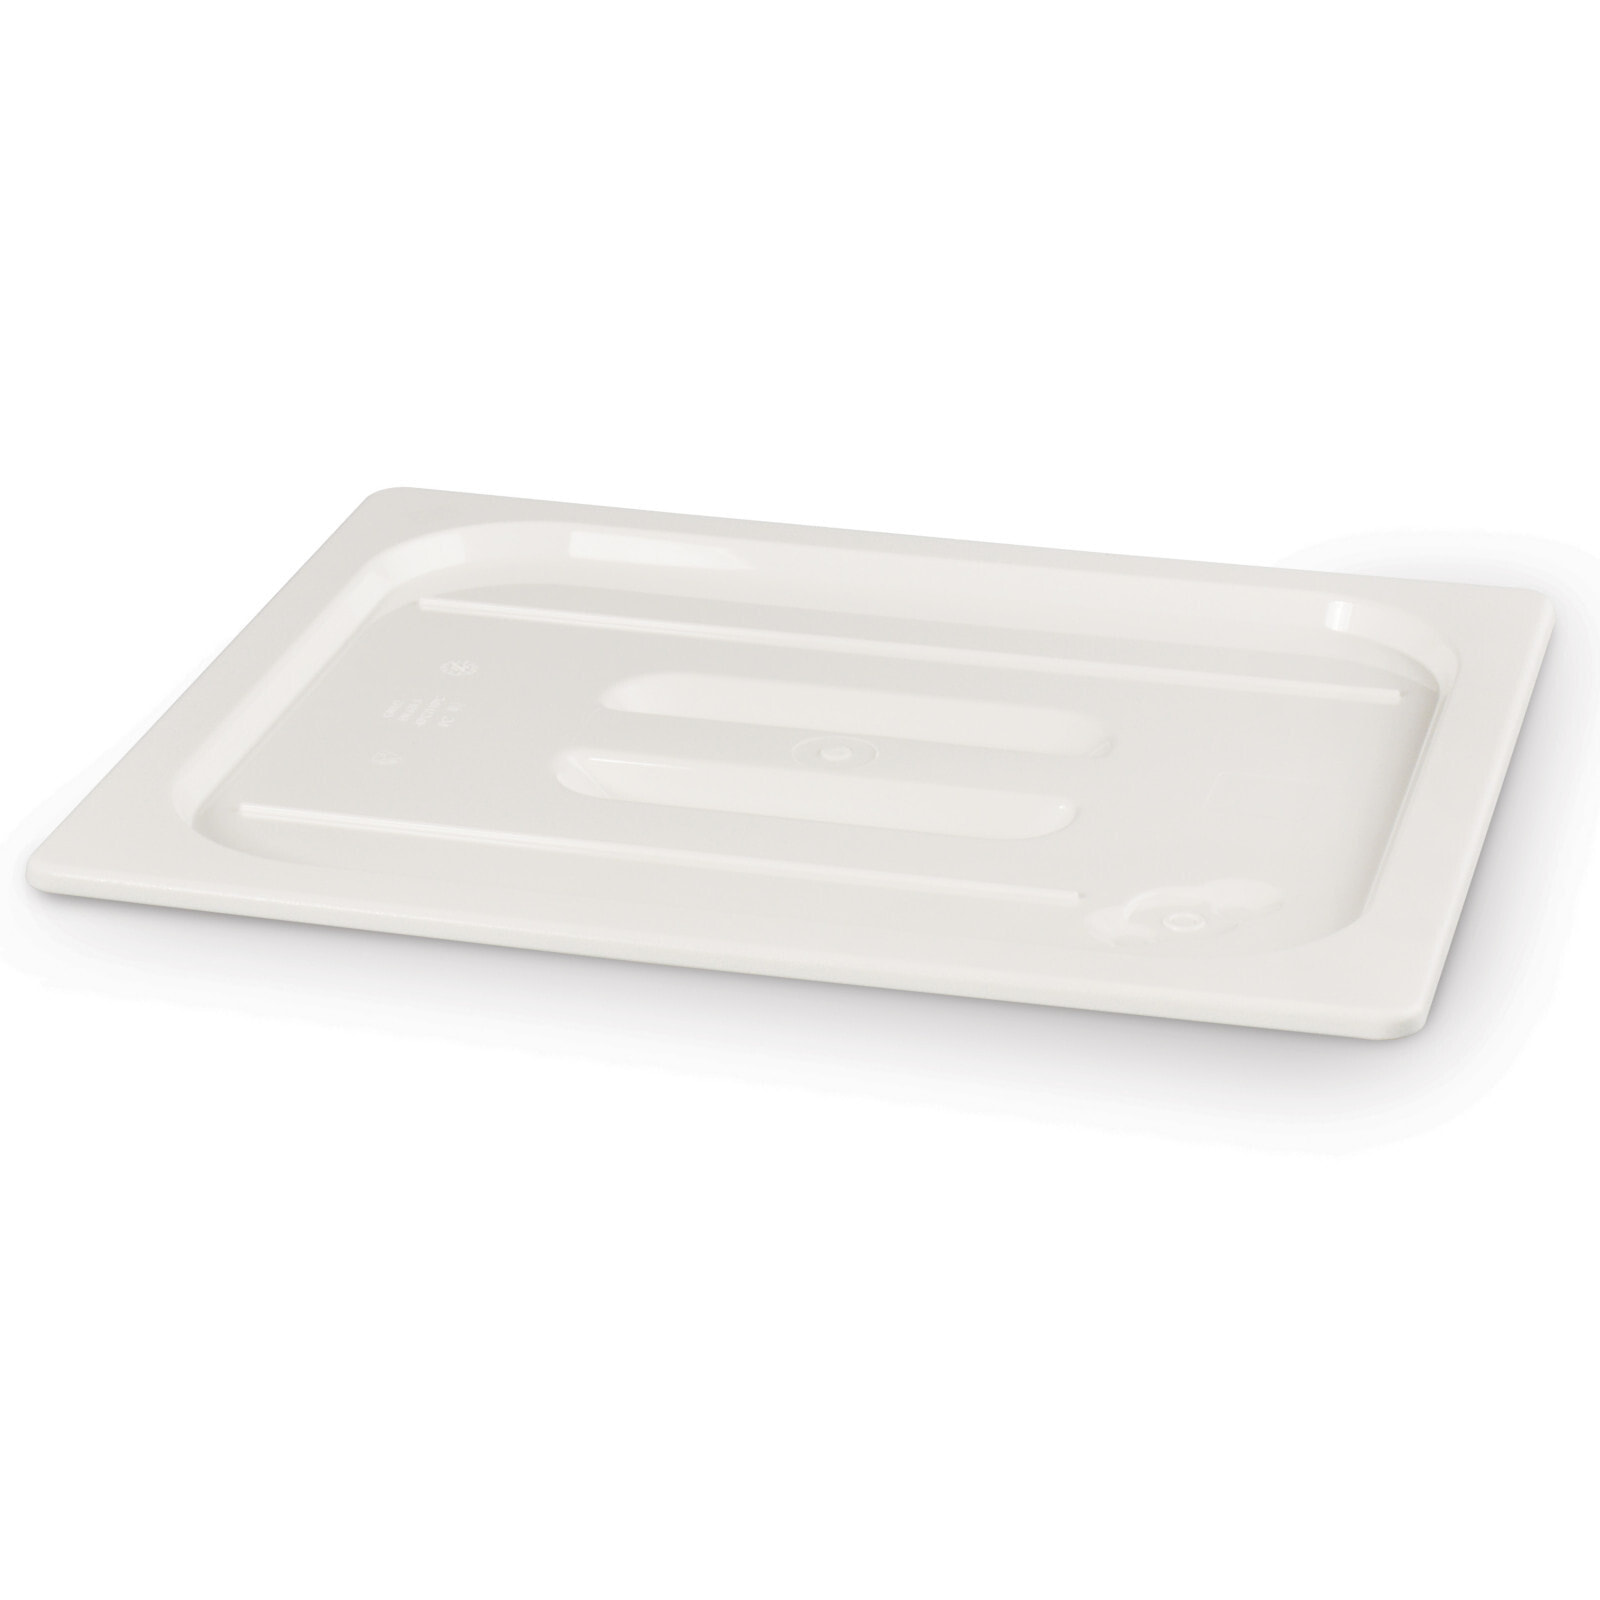 White polycarbonate lid for GN 1/2 containers - Hendi 862964